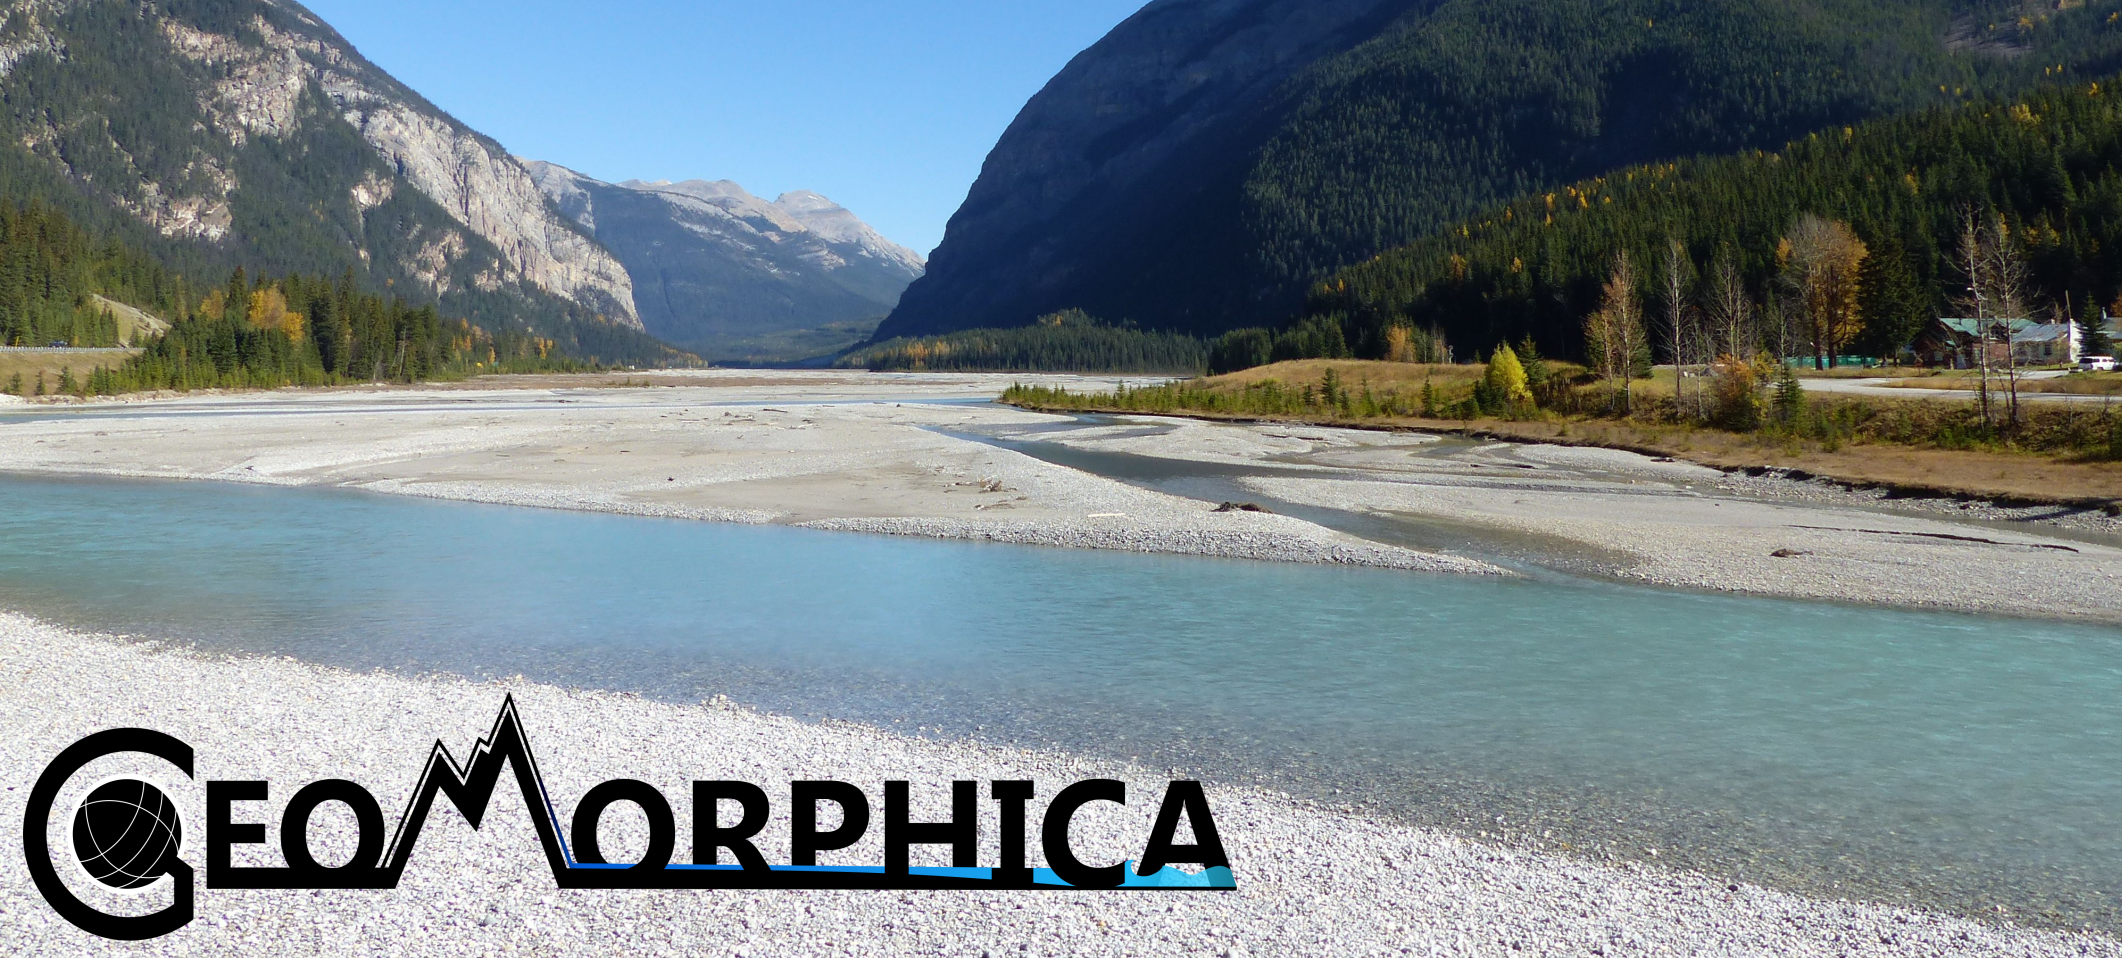 An image of a gravel-bed river flowing between mountains. A dark logo on the bottom left reads "Geomorphica". Kicking Horse River at Field, Yoho National Park Photo by: Dr Dale Leckie (@DaleALeckie)